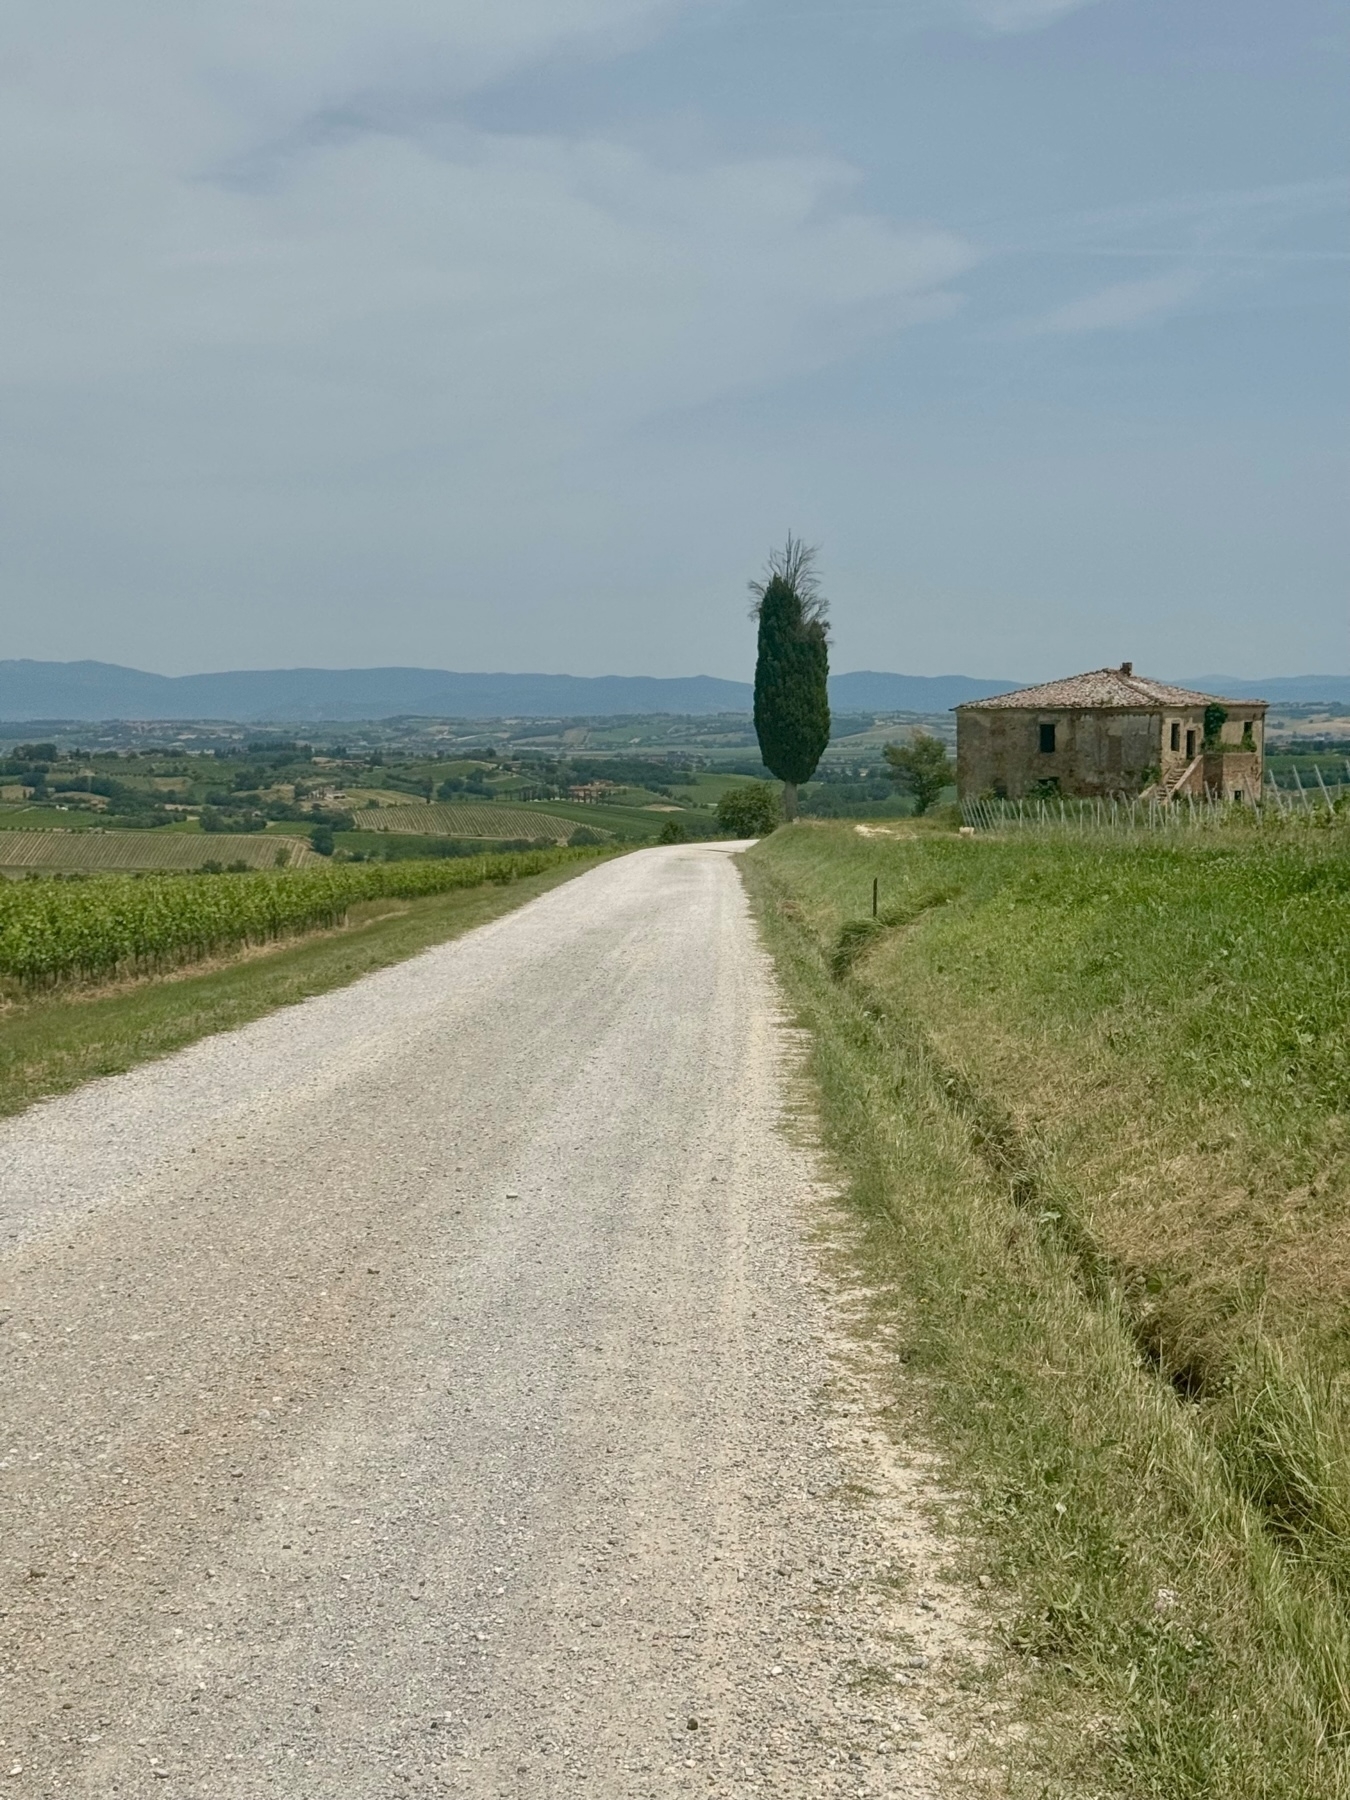 A gravel road running through a rural landscape with greenery and rolling hills in the background. On the right side of the road, there is an old, rustic stone building with a tiled roof, and a tall, narrow cypress tree stands nearby. 